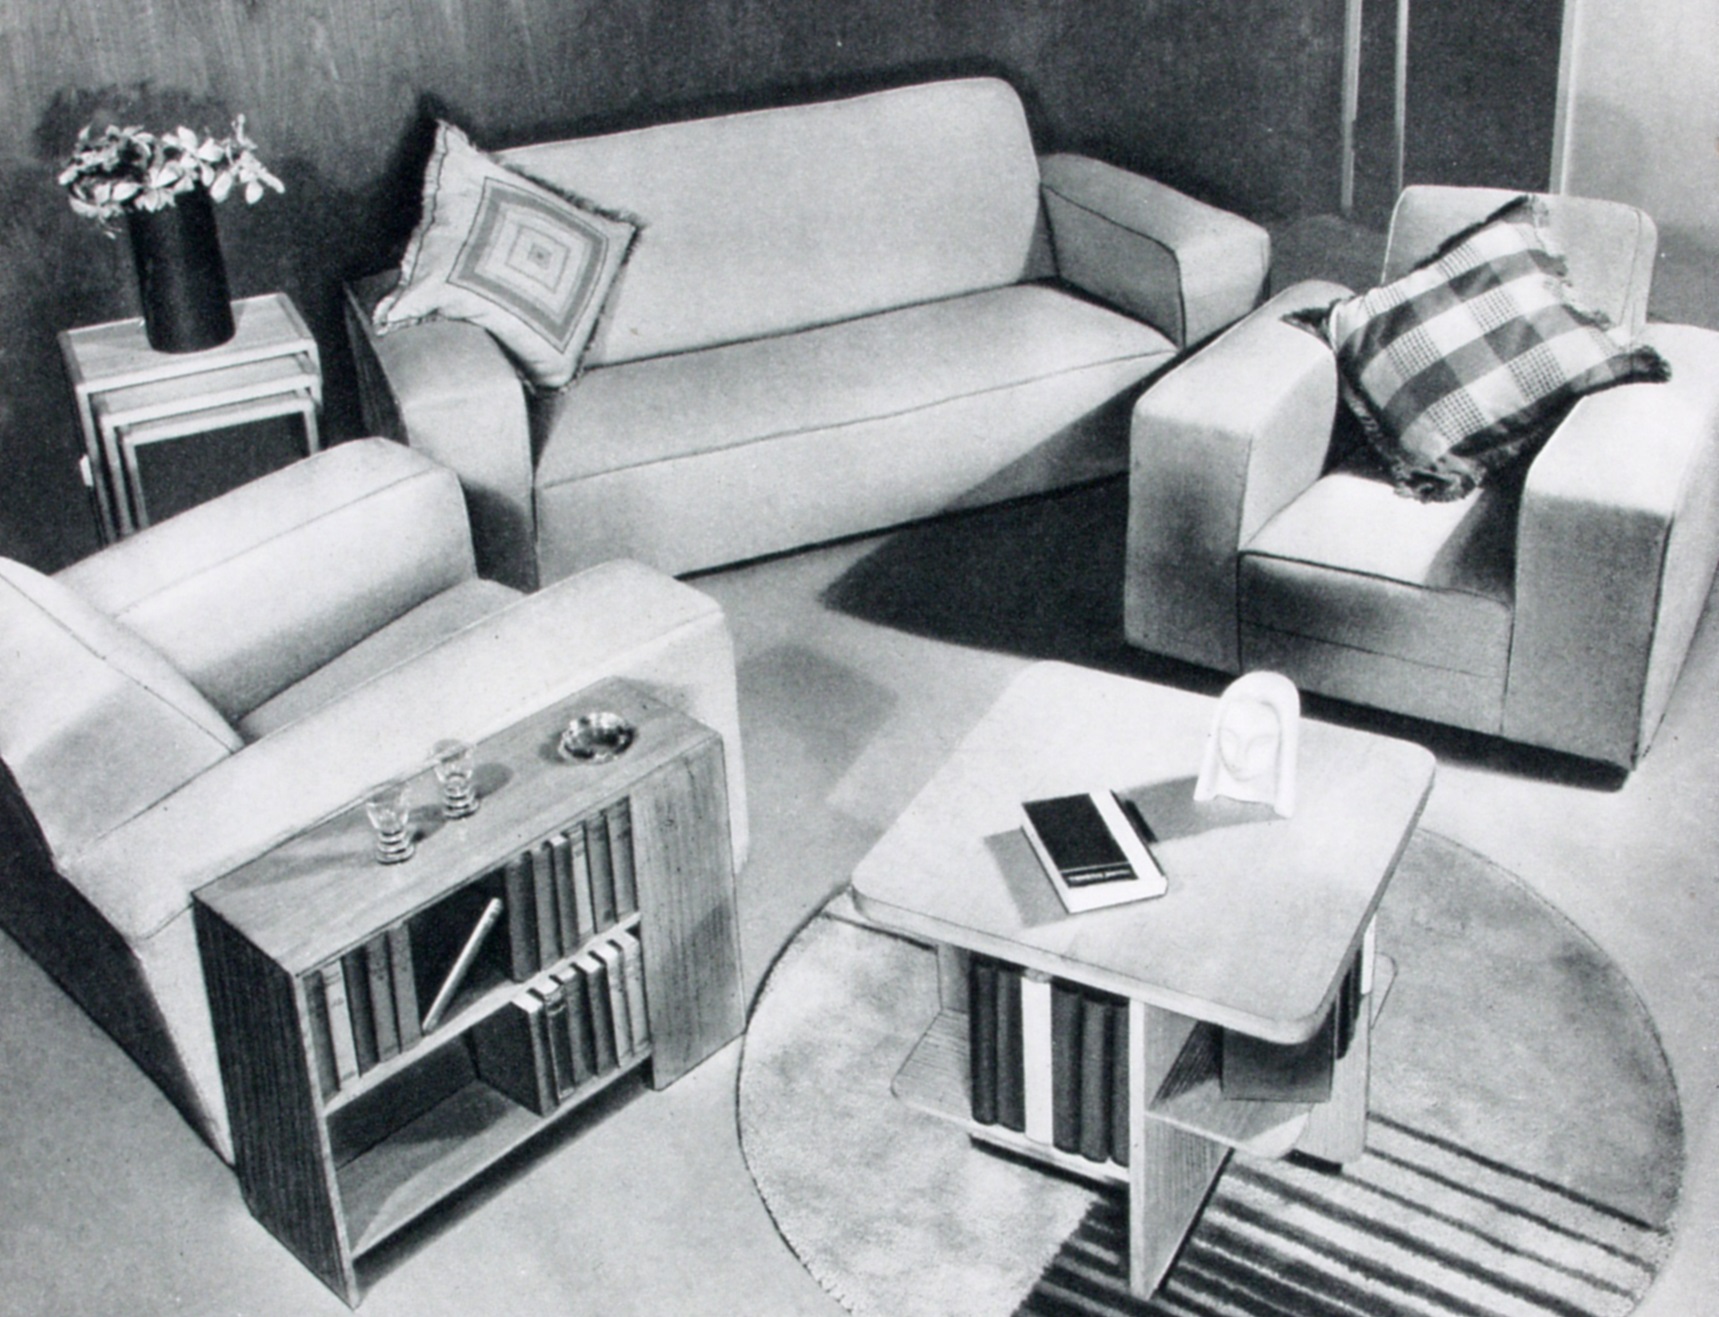 Black and white image of modernist furniture in domestic setting.